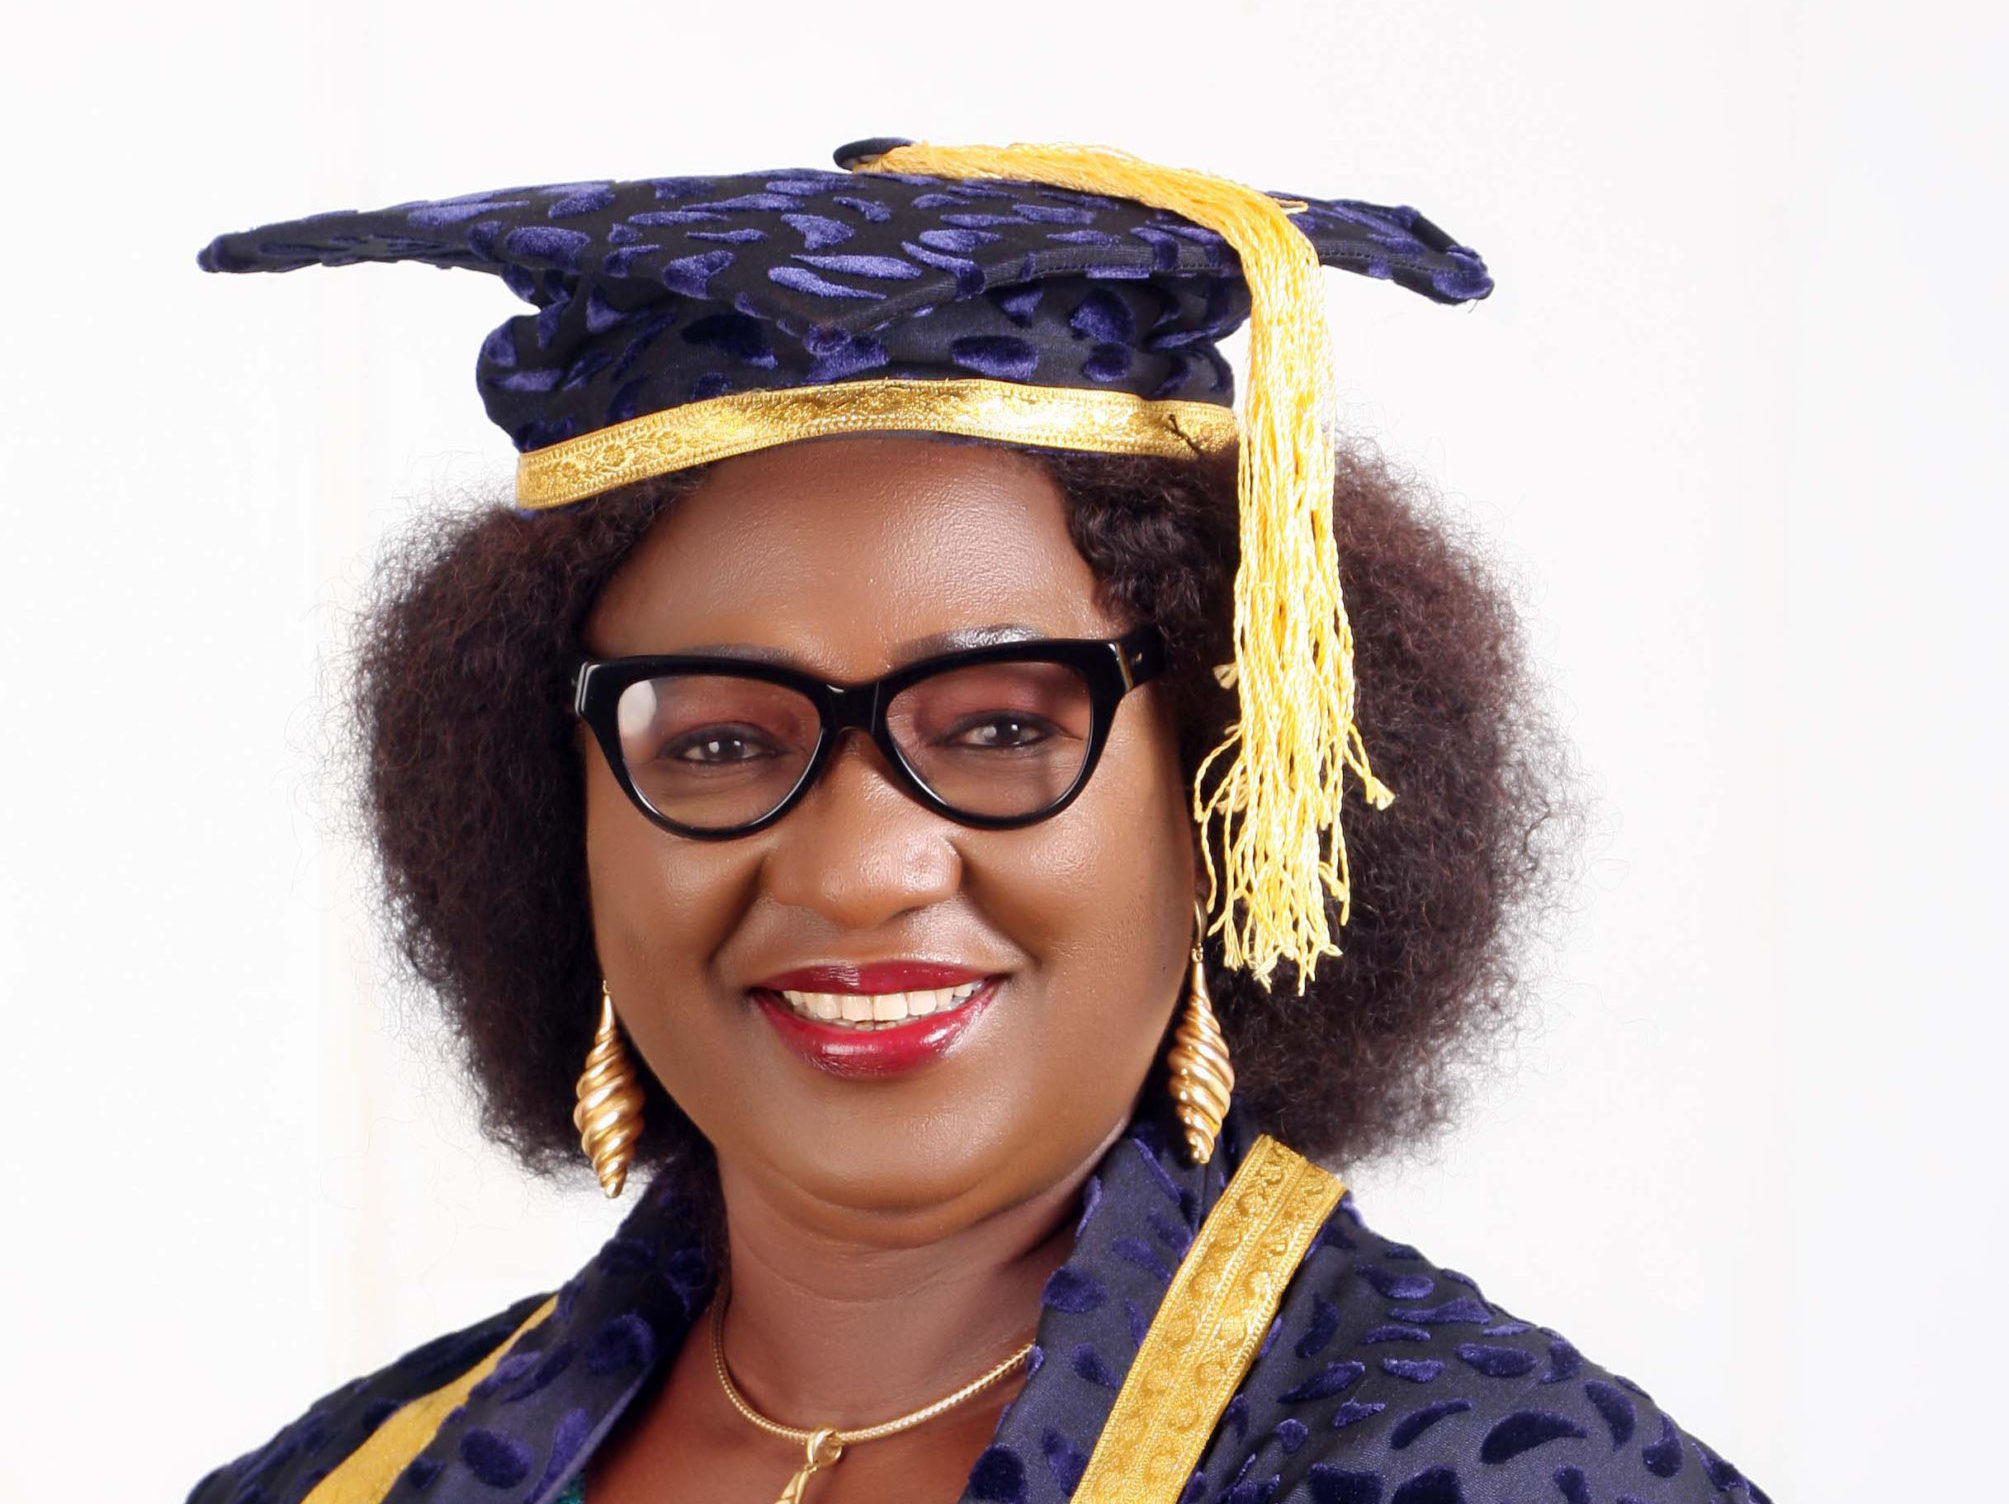 UNICAL VC urges students to report cases of sexual harassment